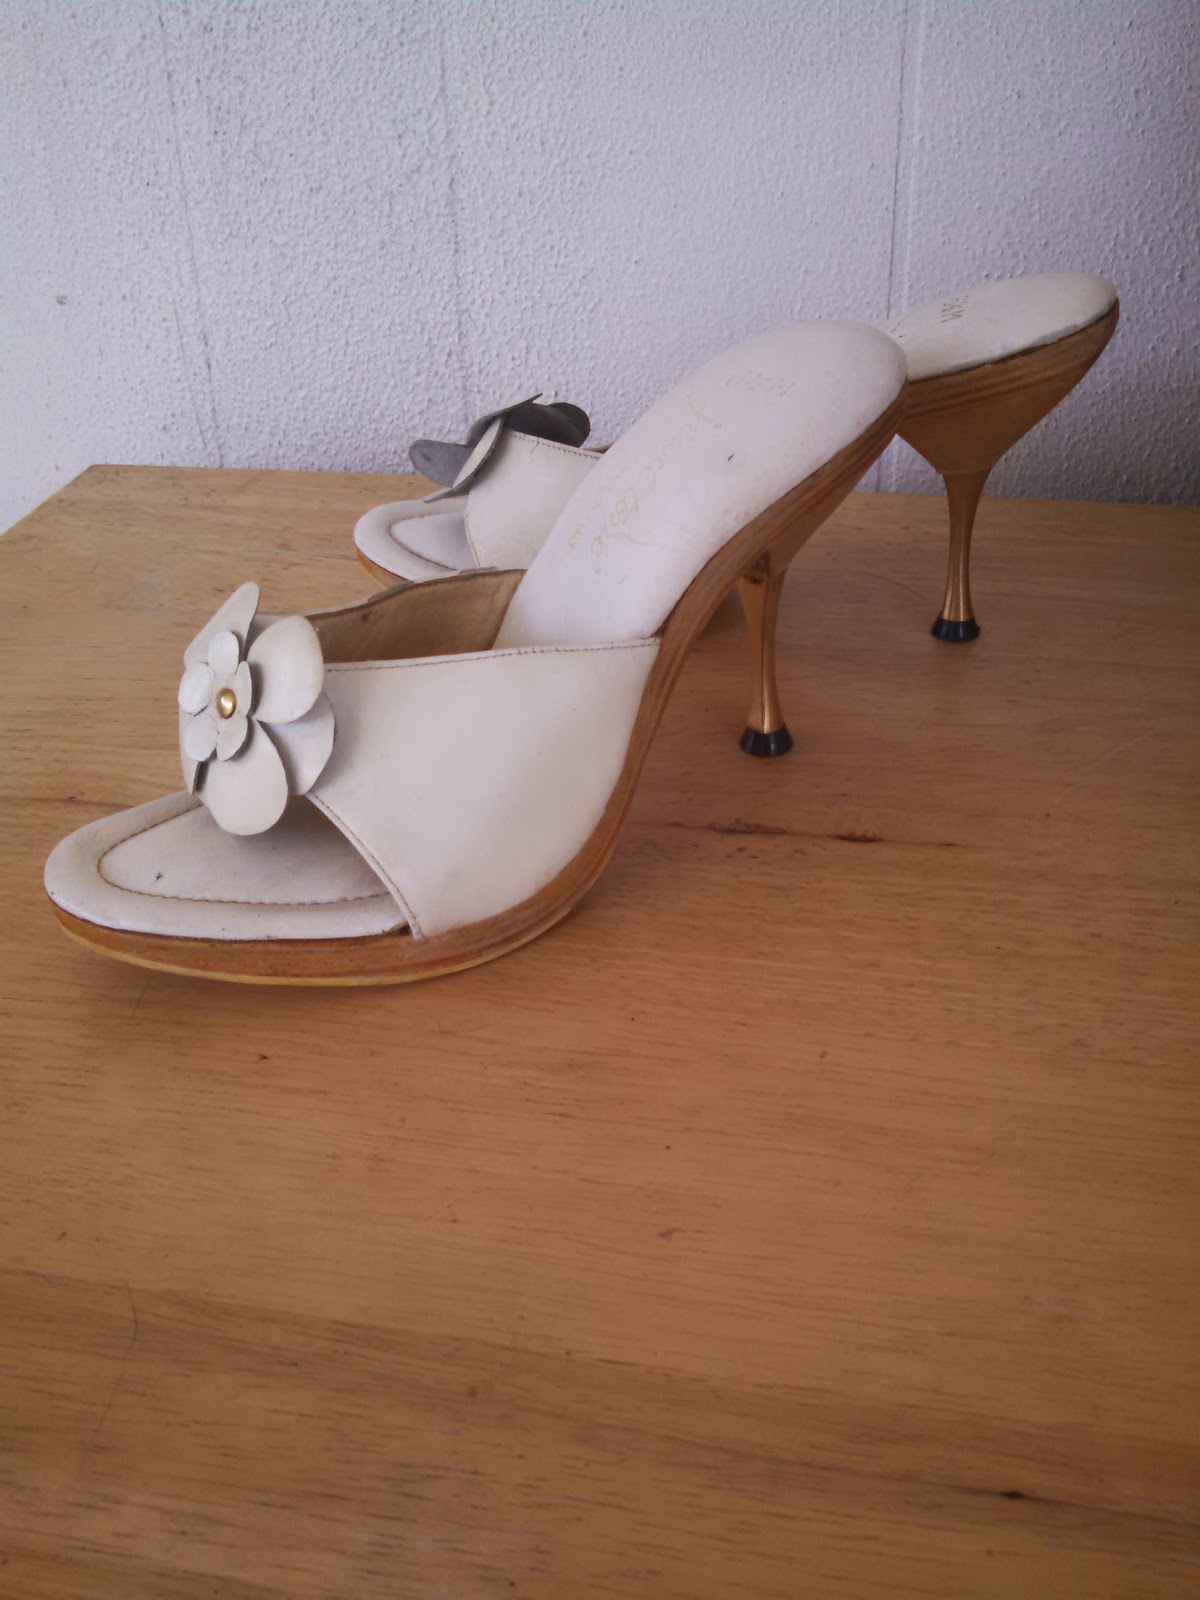 Sexy! 1950s wooden Platform Mules with Golden Spike heels! Available ...